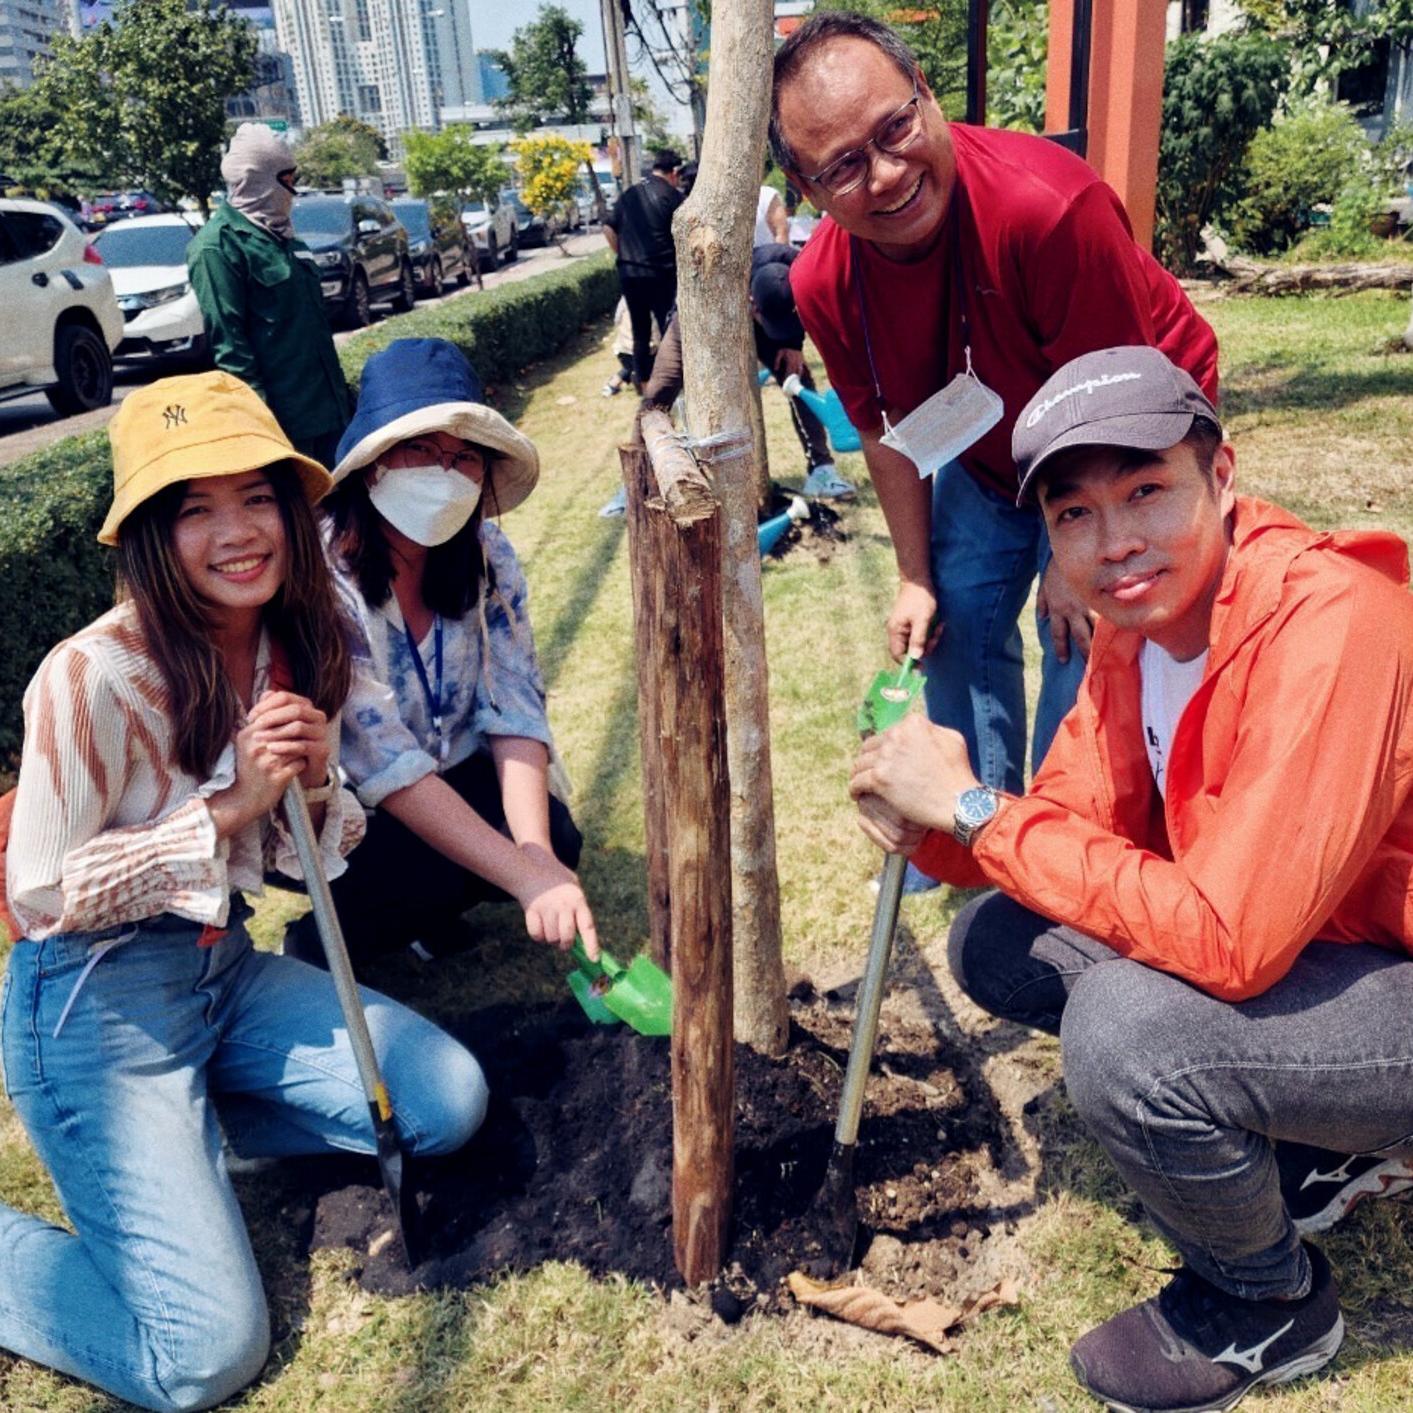 ZEISS employees in Thailand planting trees on earth day